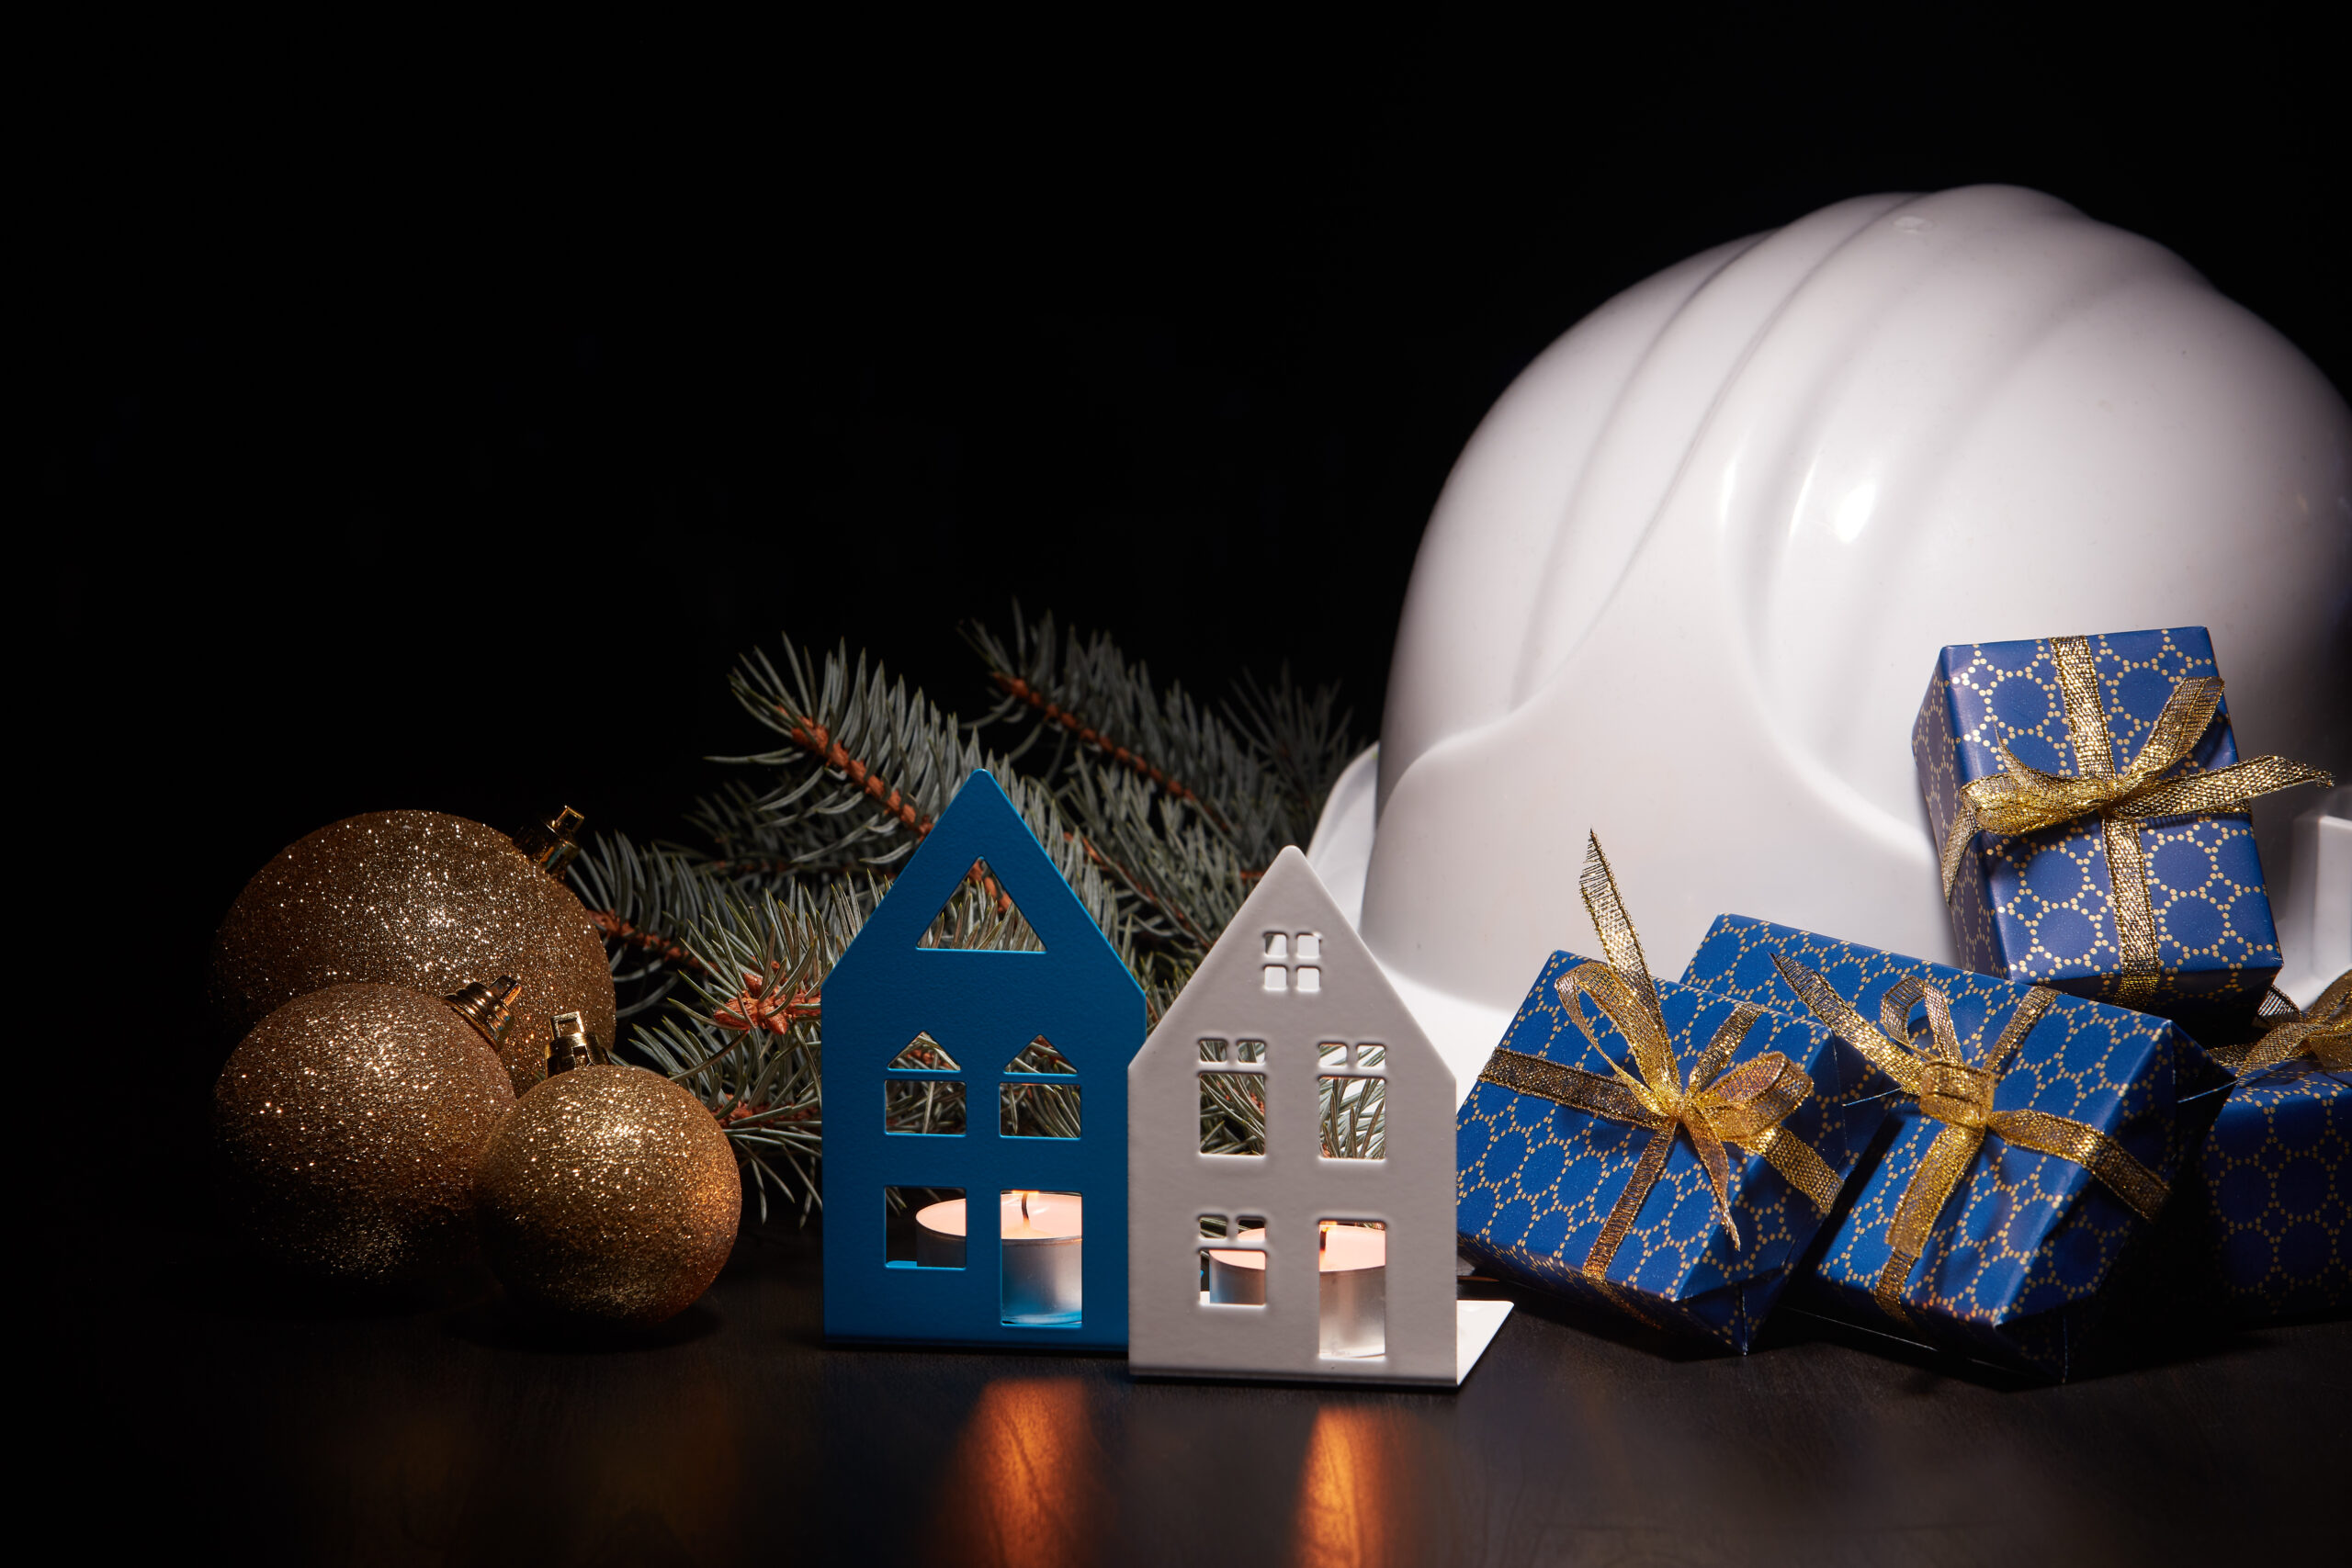 What Happens to Construction Projects During the Christmas Holiday Period?